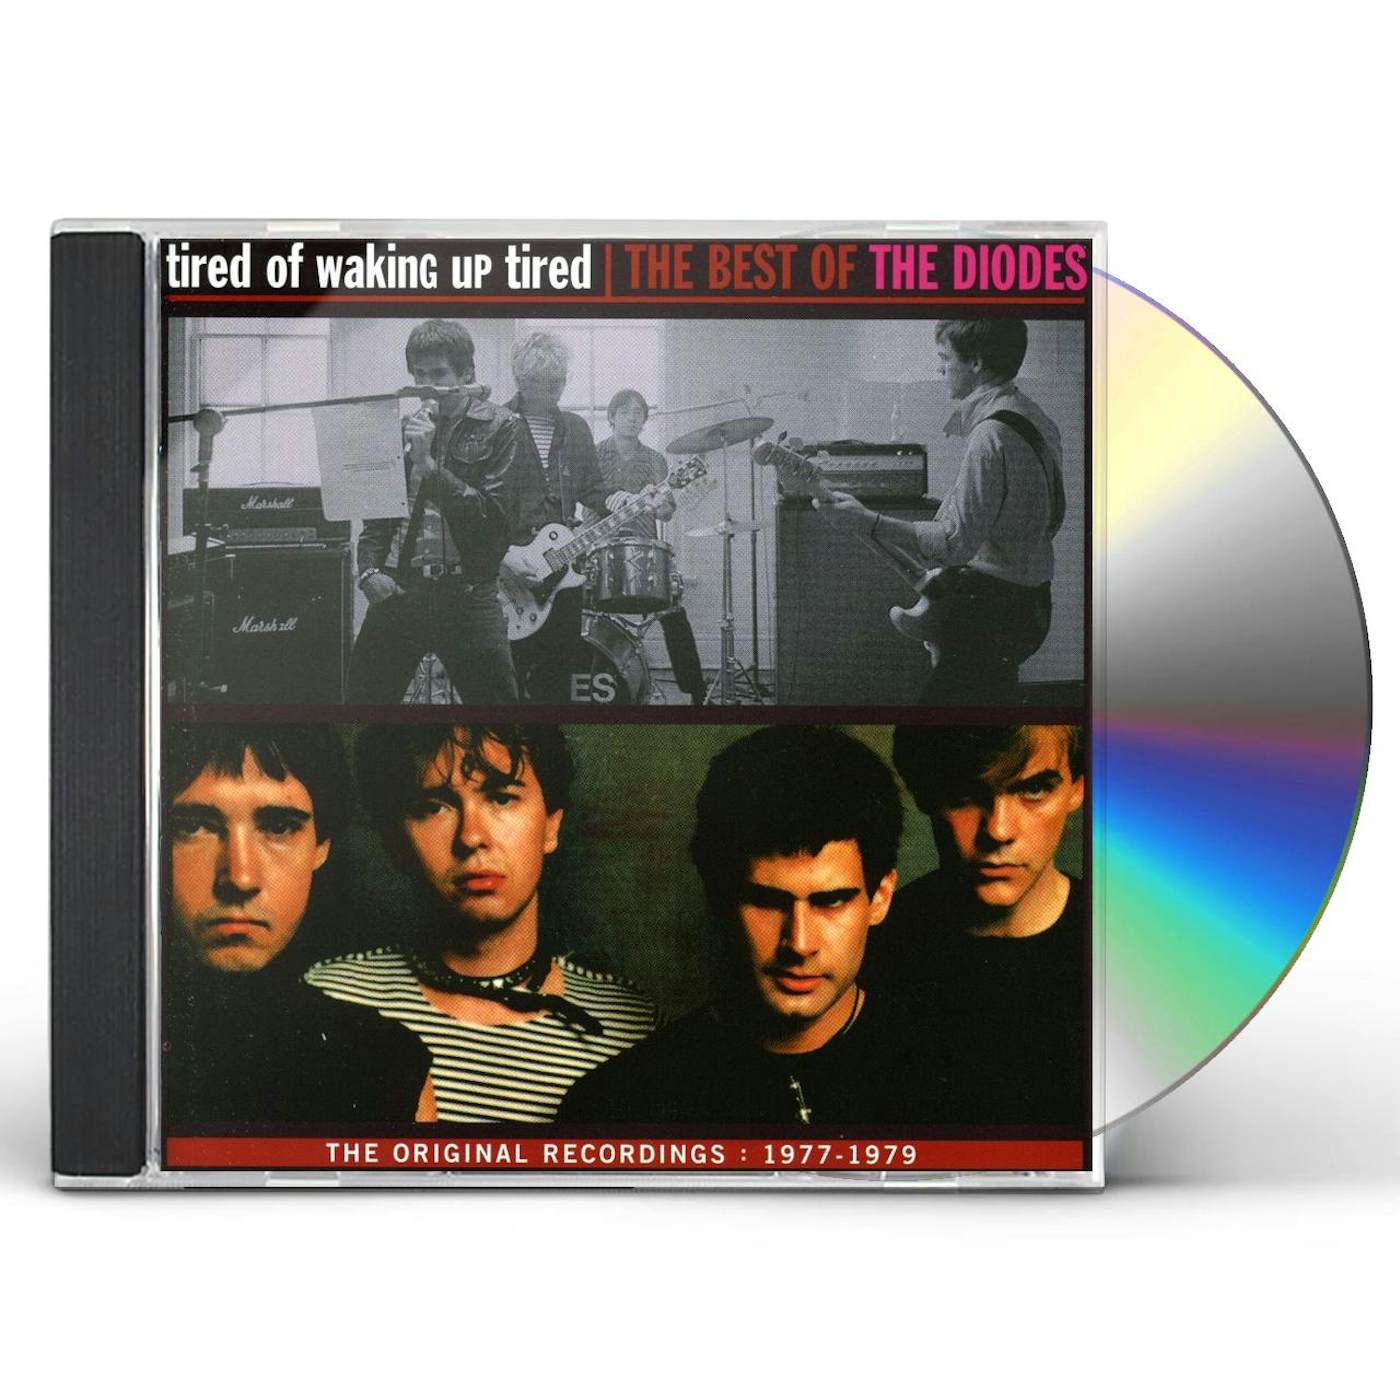 The Diodes TIRED OF MAKING UP TIRED: BEST OF CD